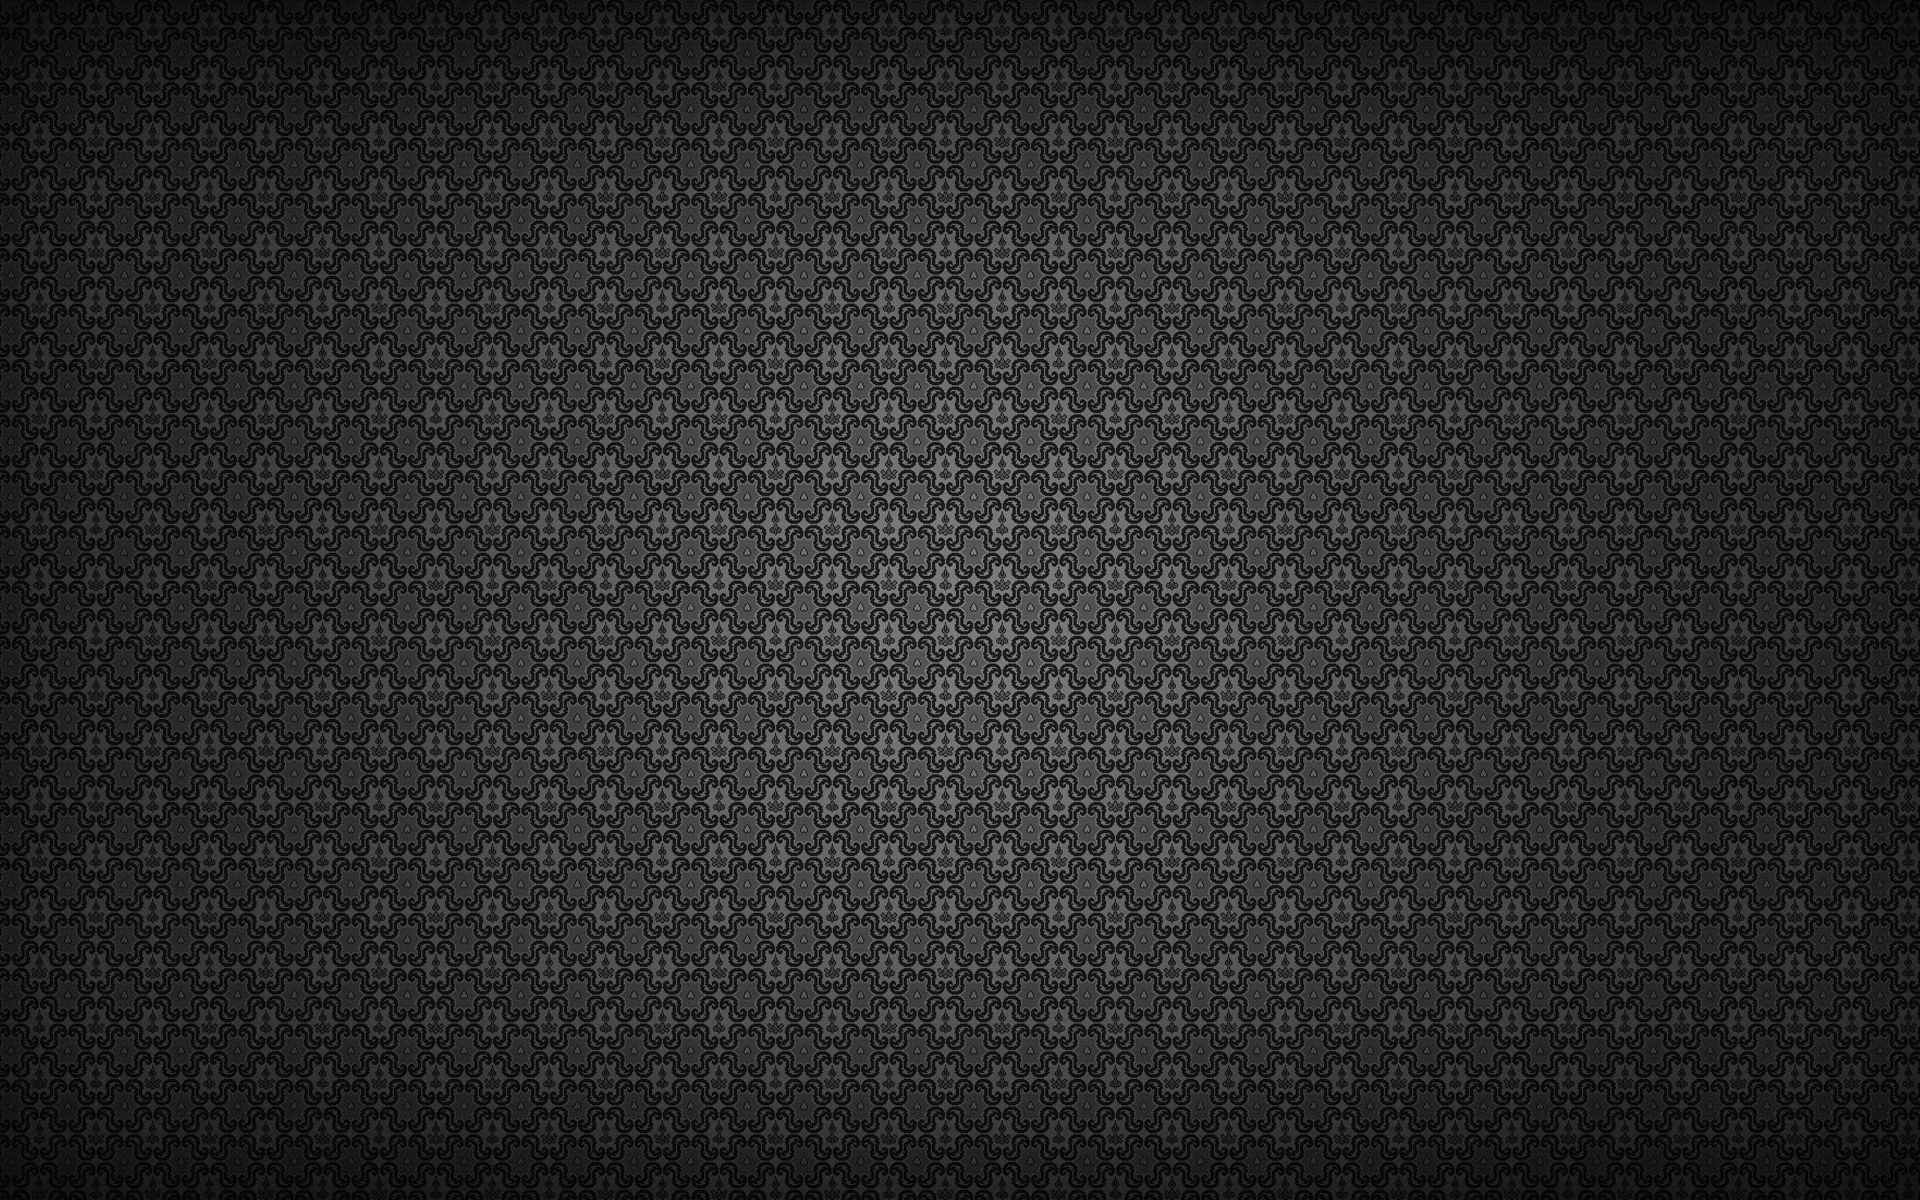 patterns, creative, textures, style, texture, background cellphone